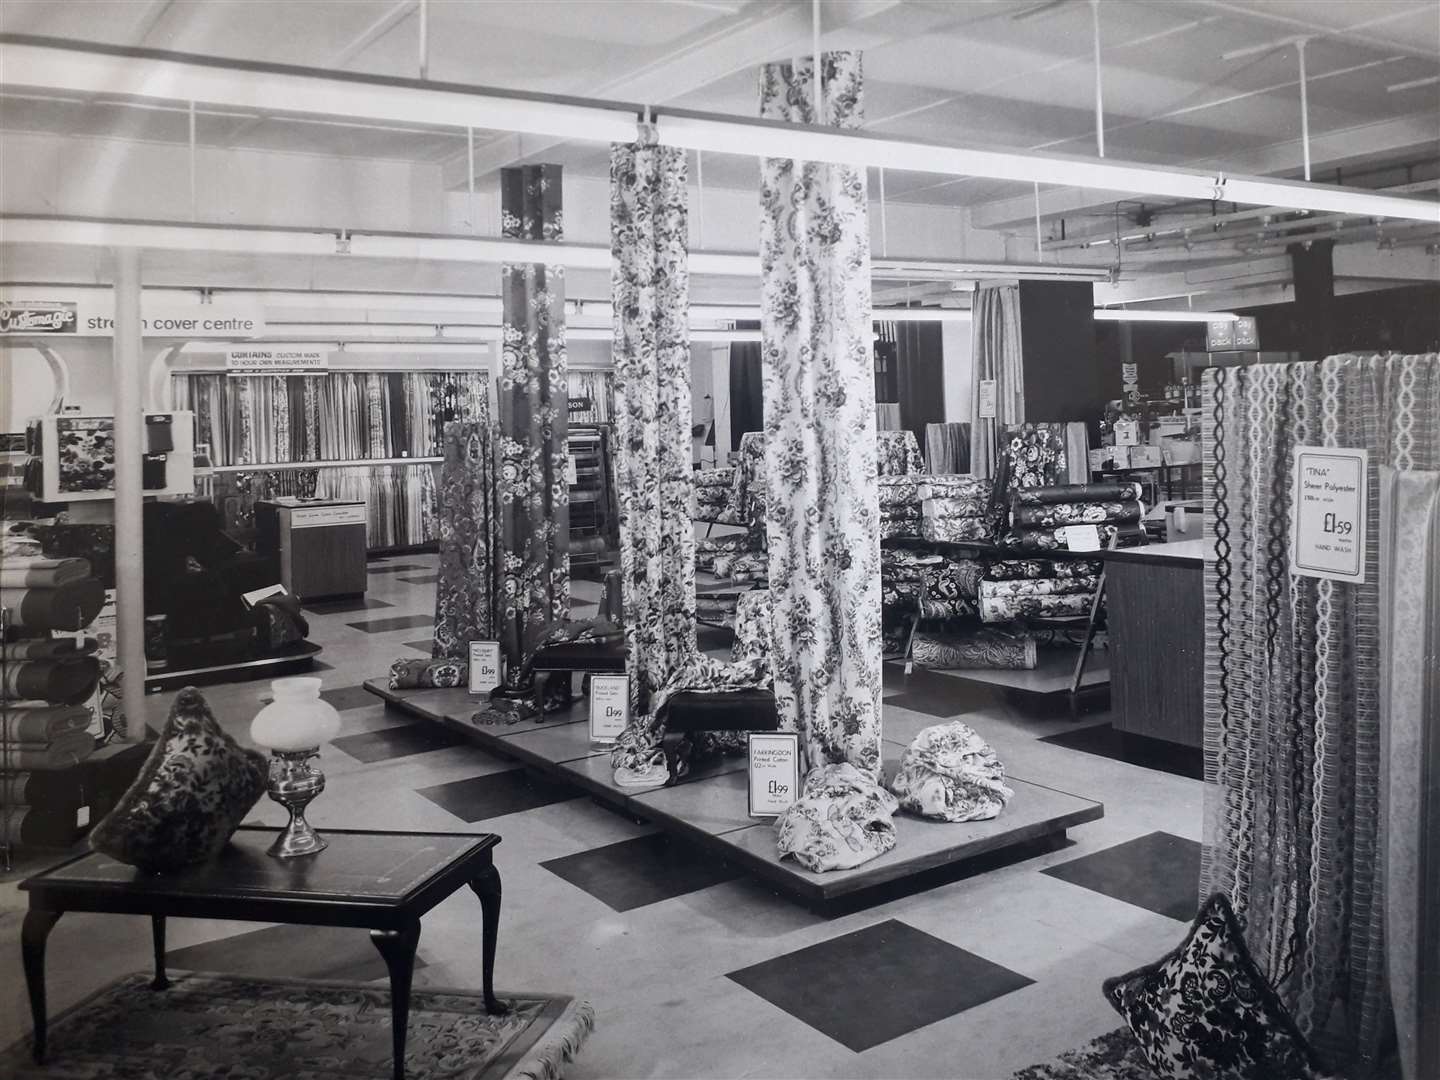 How the store's interior once looked